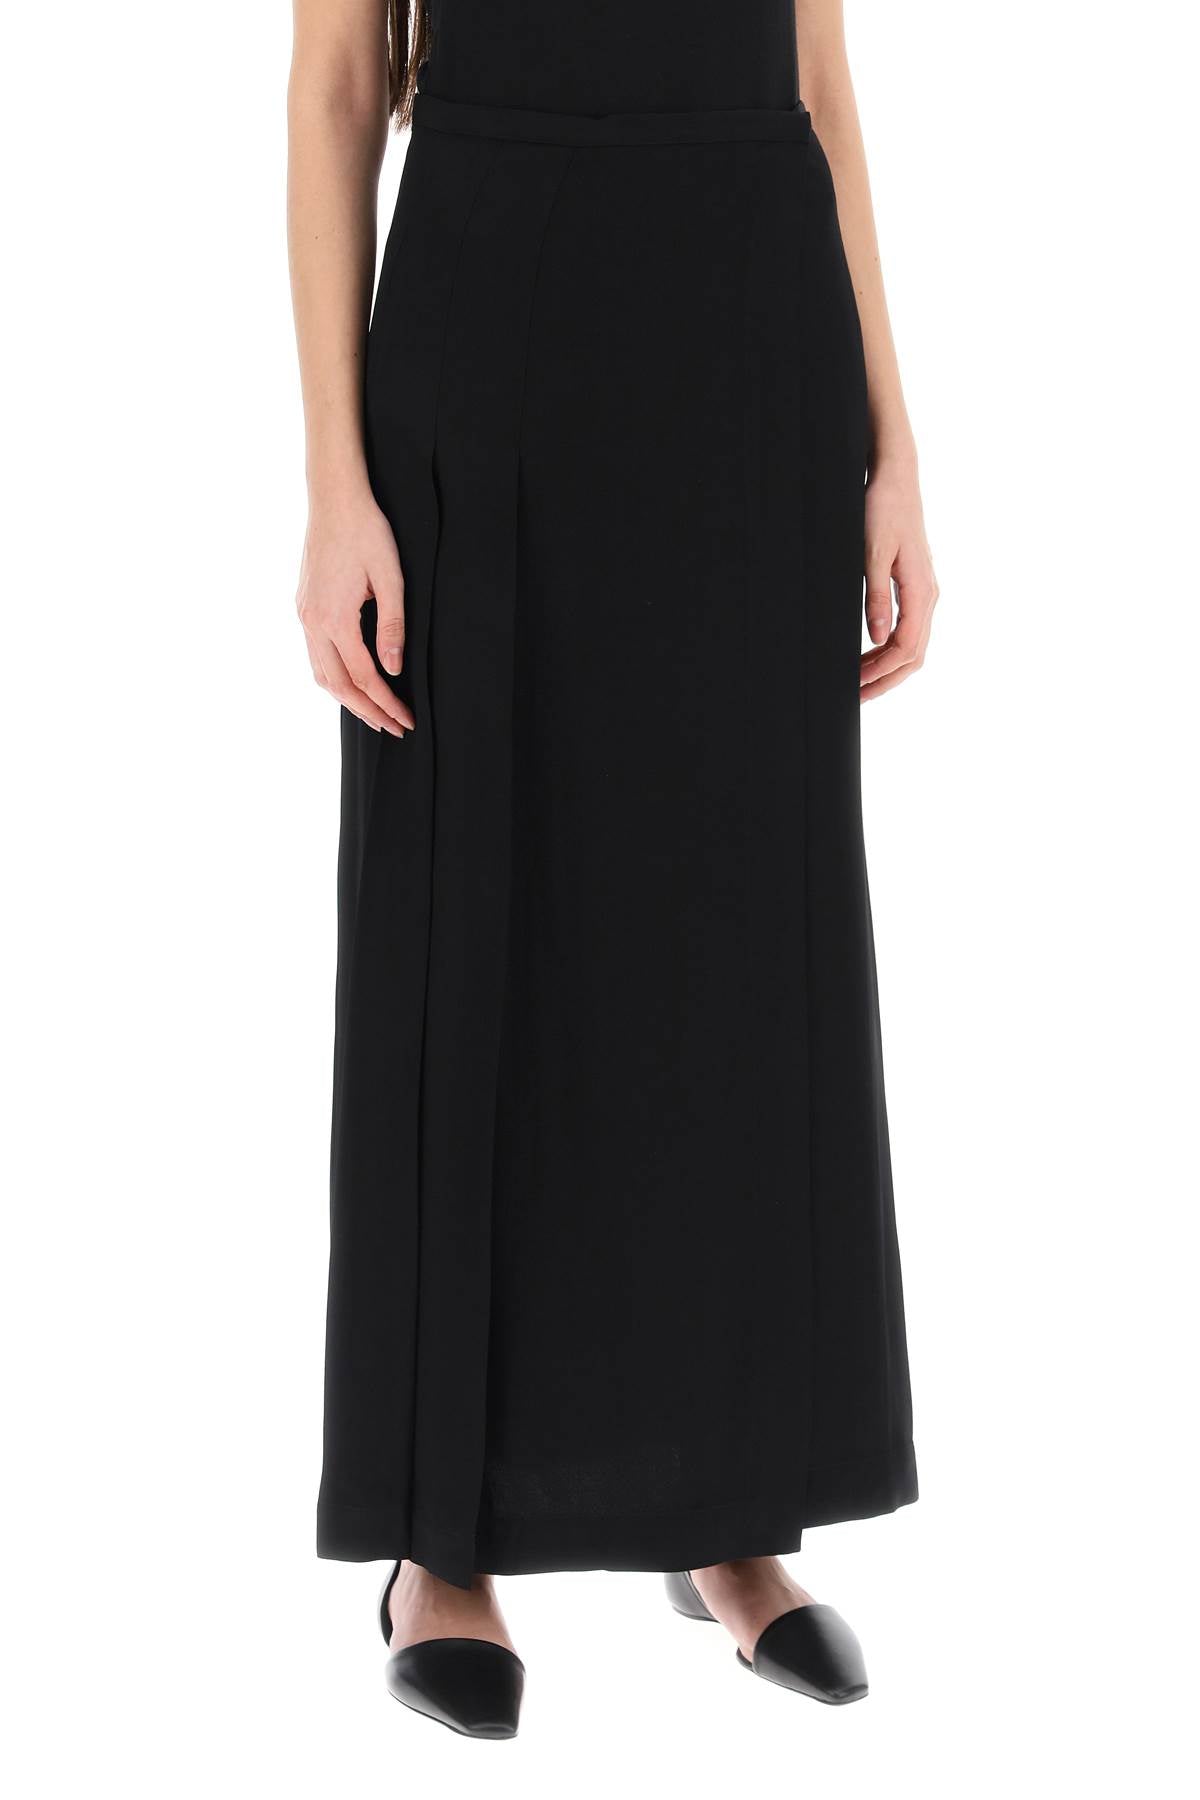 Toteme Toteme maxi wrap skirt with pockets